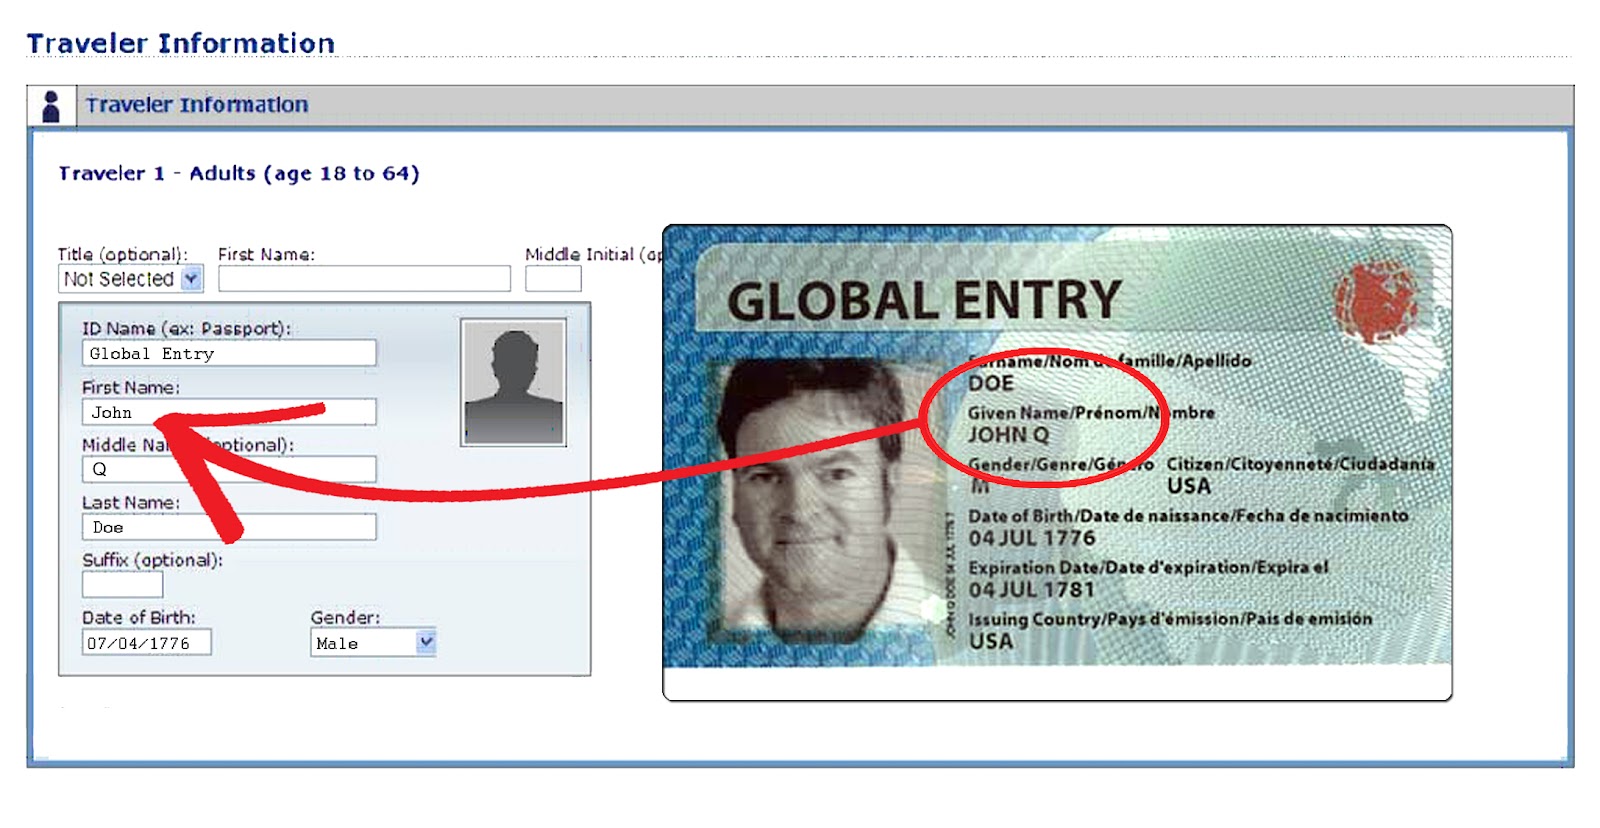 Id travel. Global entry Card. Global entry (лет) number. Redress number. Issuing Country.